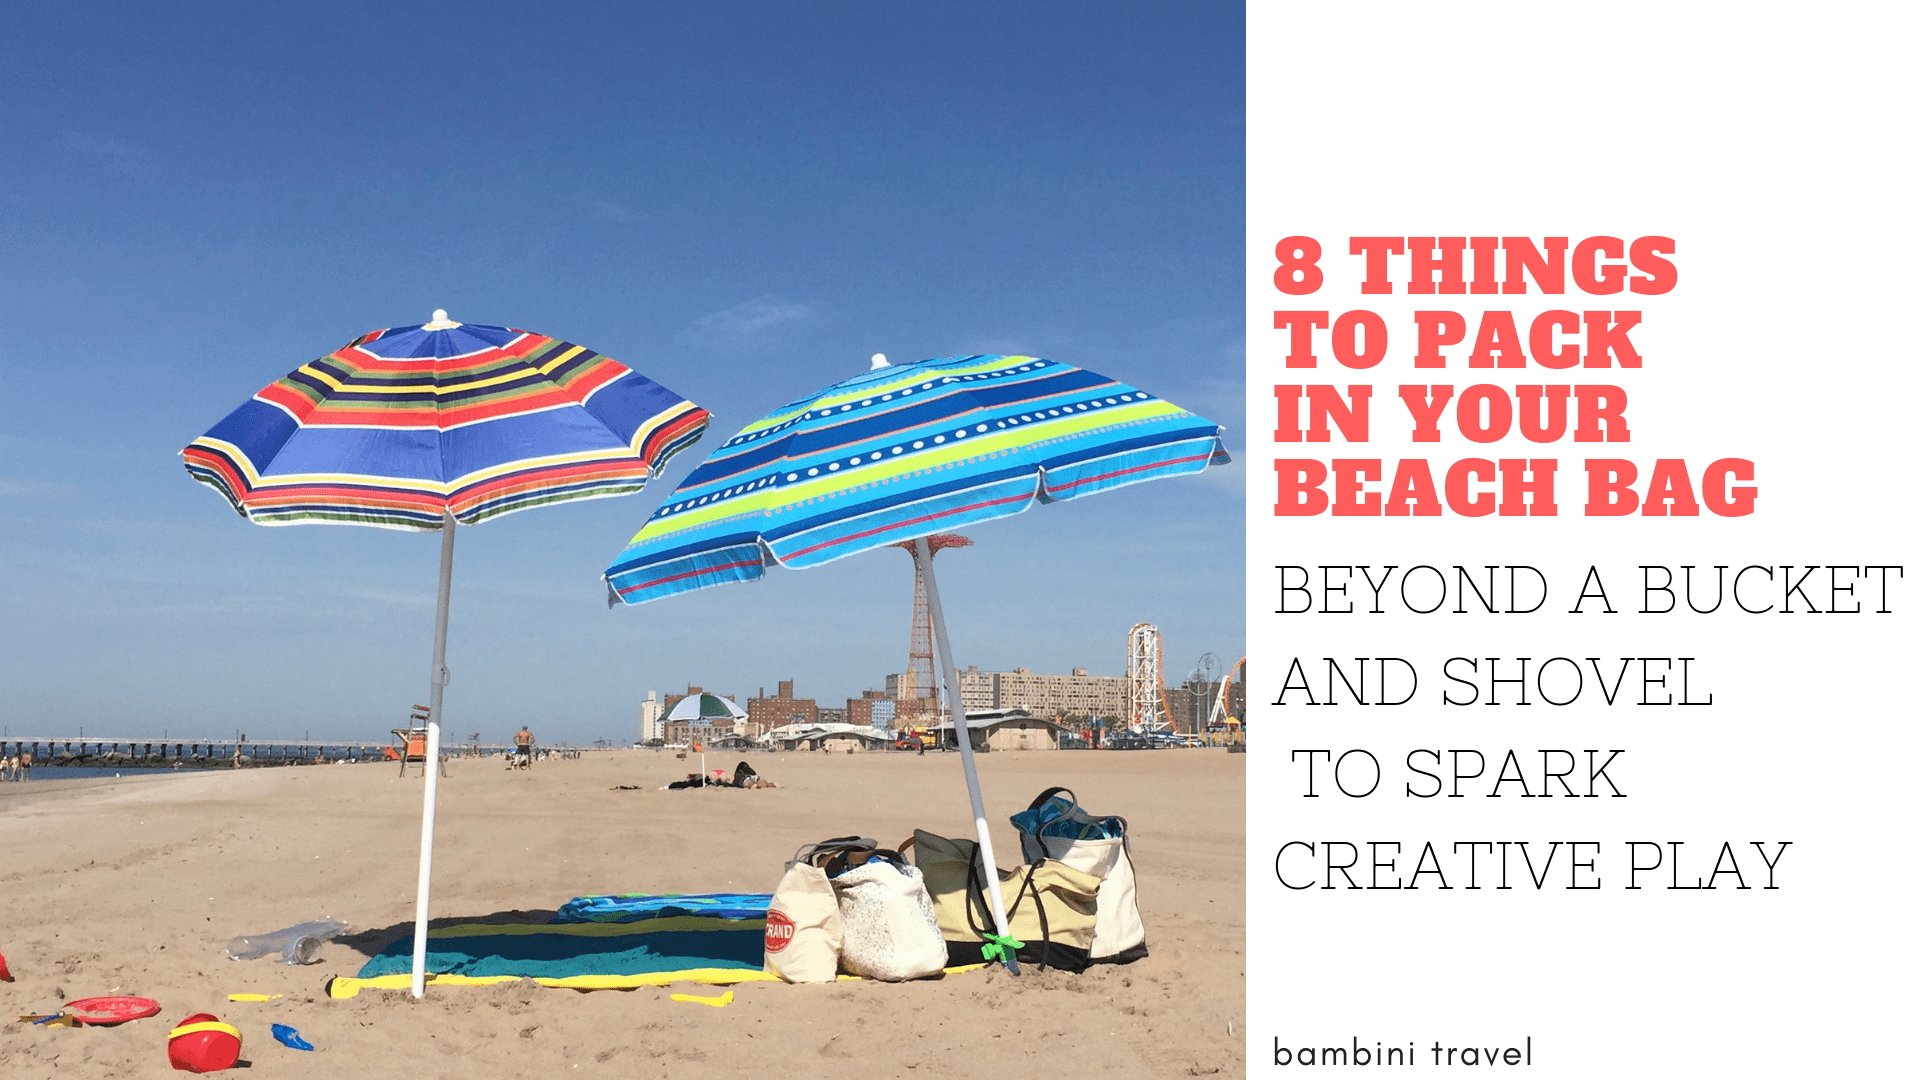 8 Things to Pack in Your Beach Bag Beyond a Bucket and Shovel to Spark Creative Play